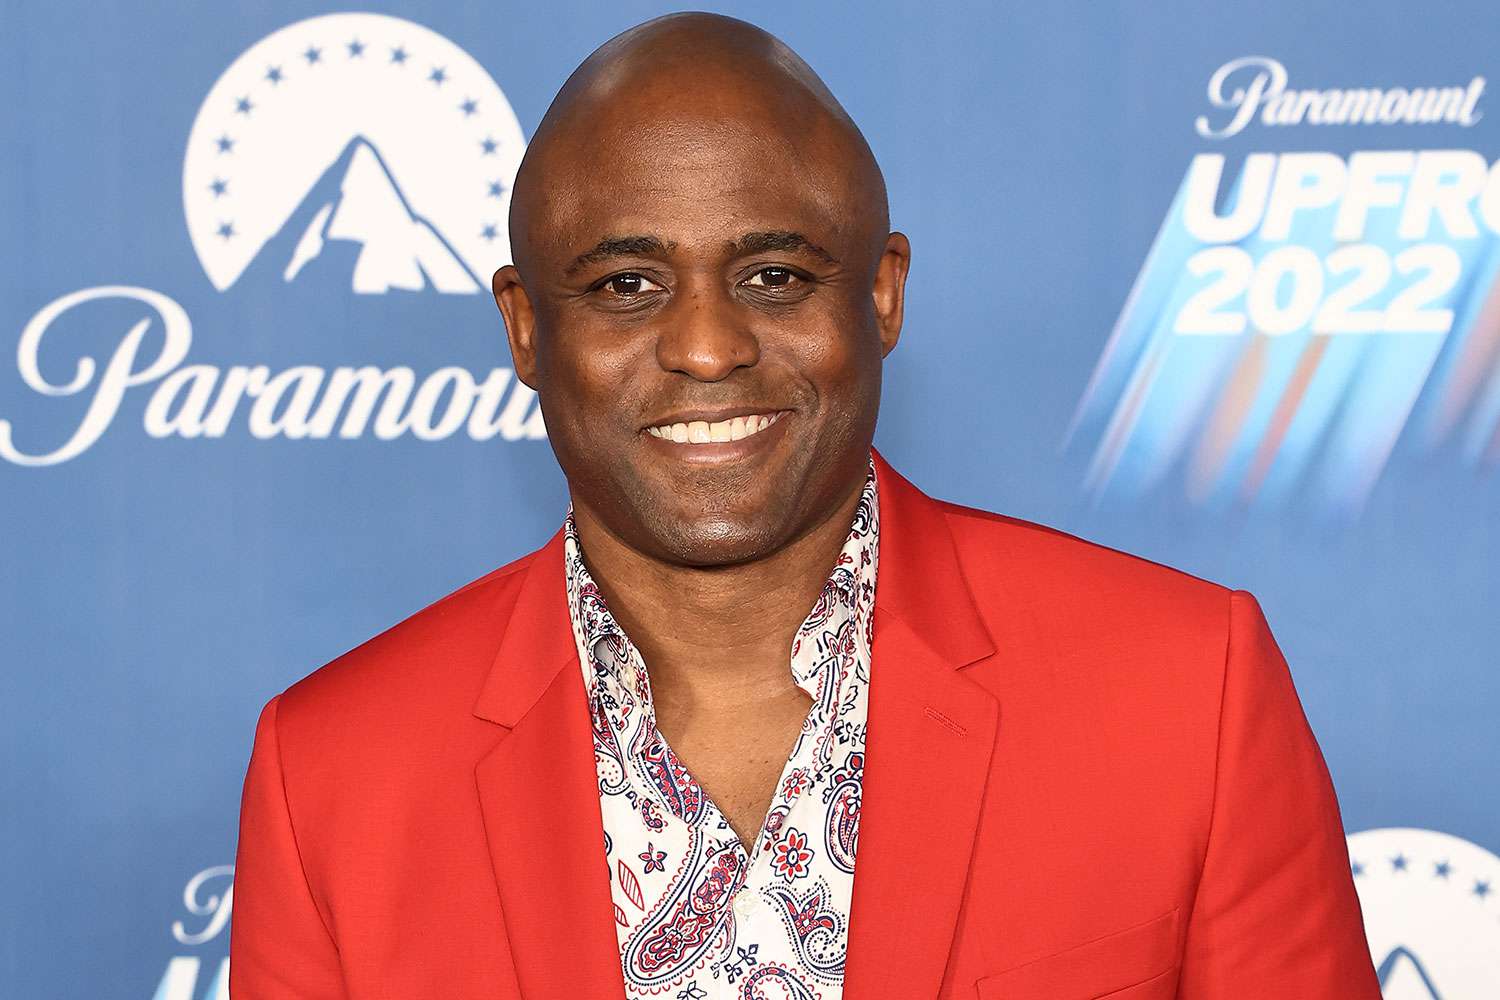 wayne-brady-involved-in-car-accident-physical-altercation-with-other-driver